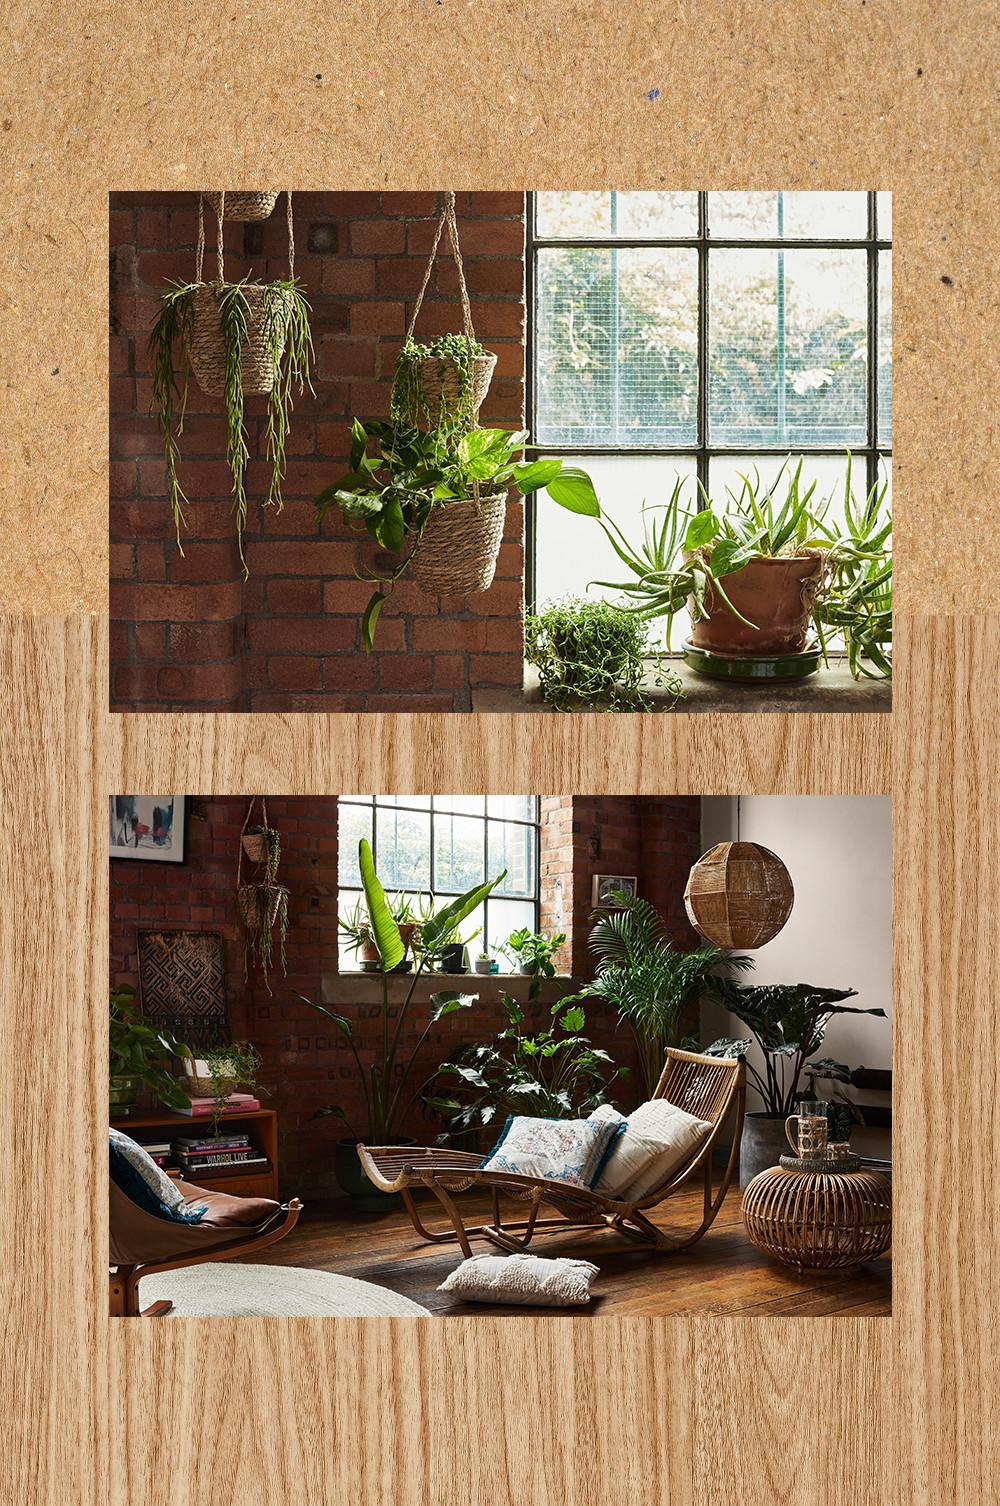 Interiors image with planters